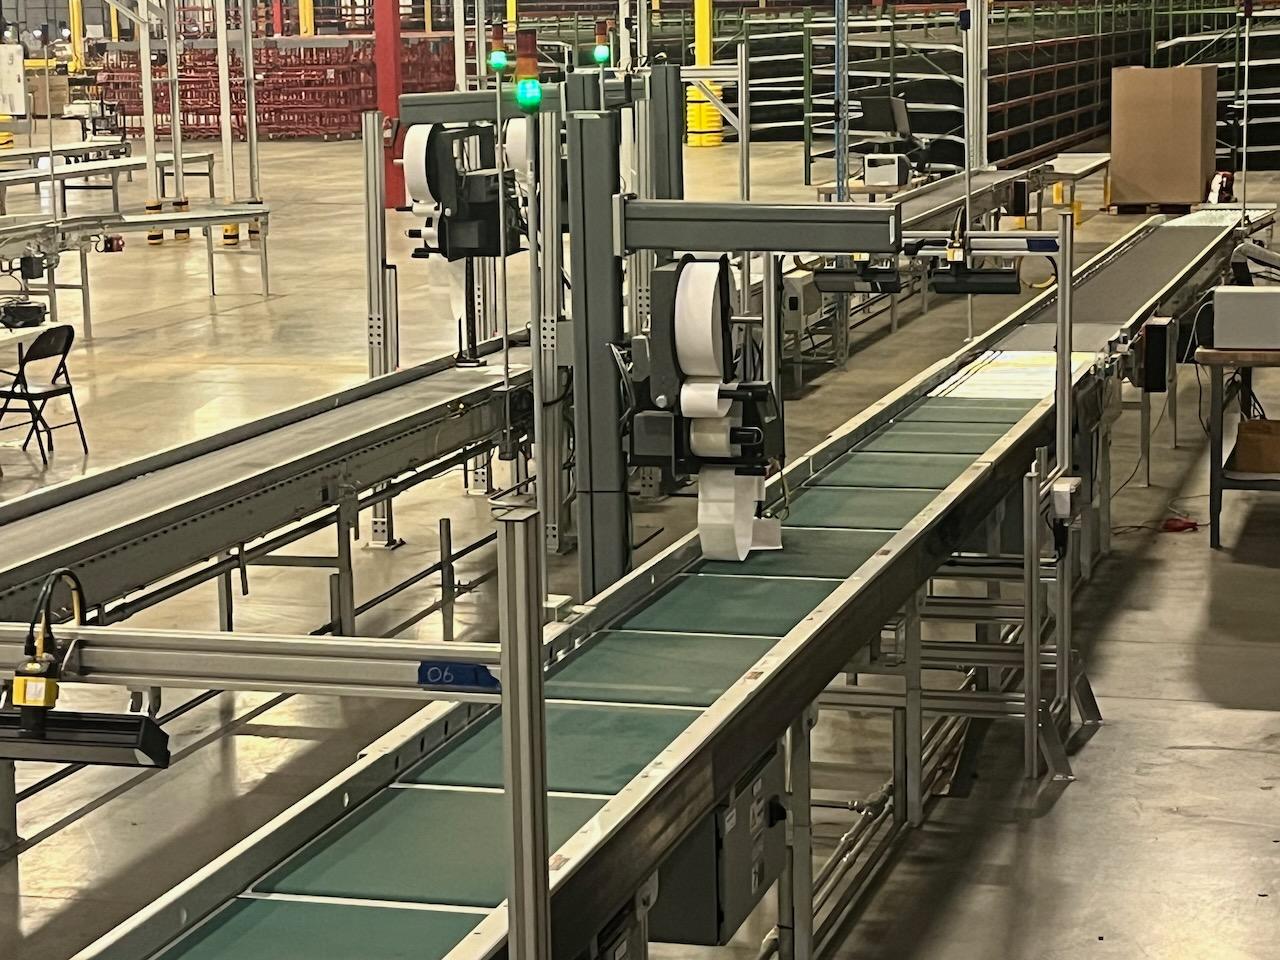 Complete Honeywell Intelligrated Conveyor / Pick System (Only 6 months old)